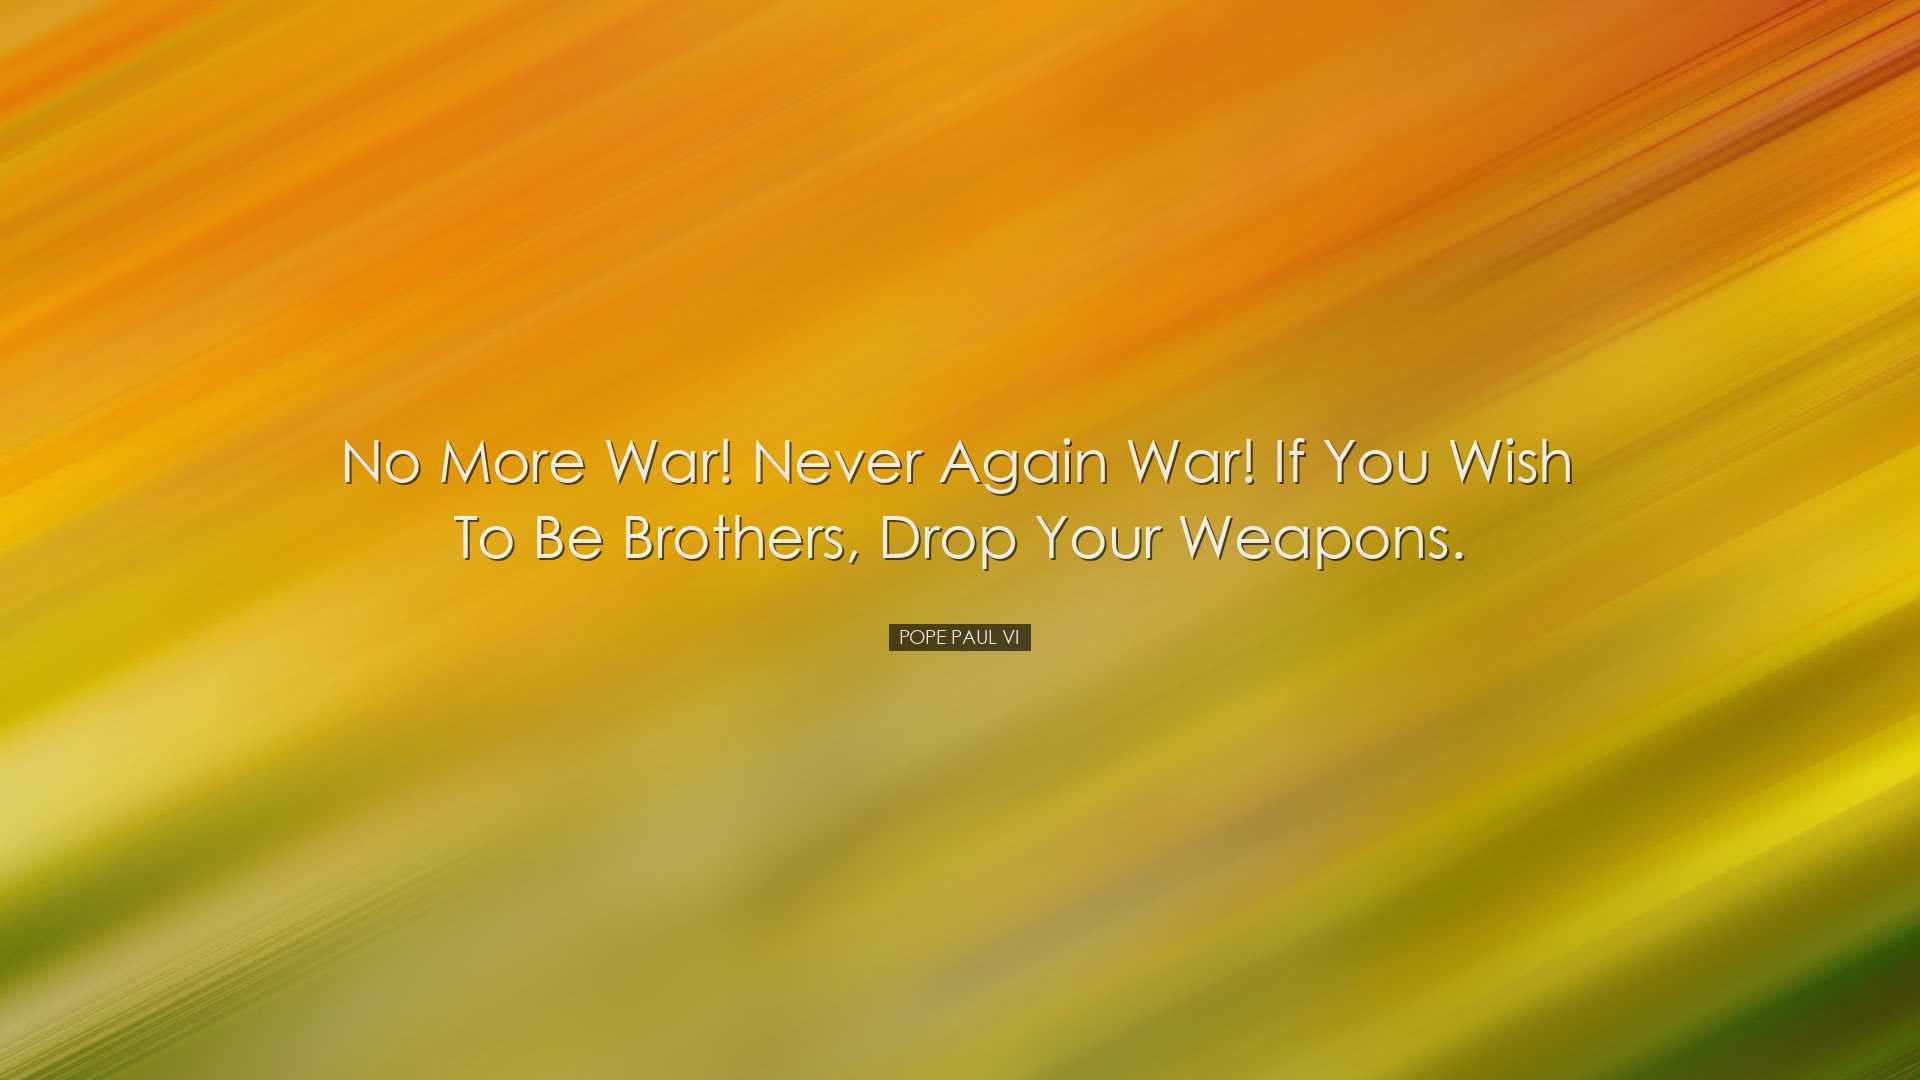 No more war! Never again war! If you wish to be brothers, drop you